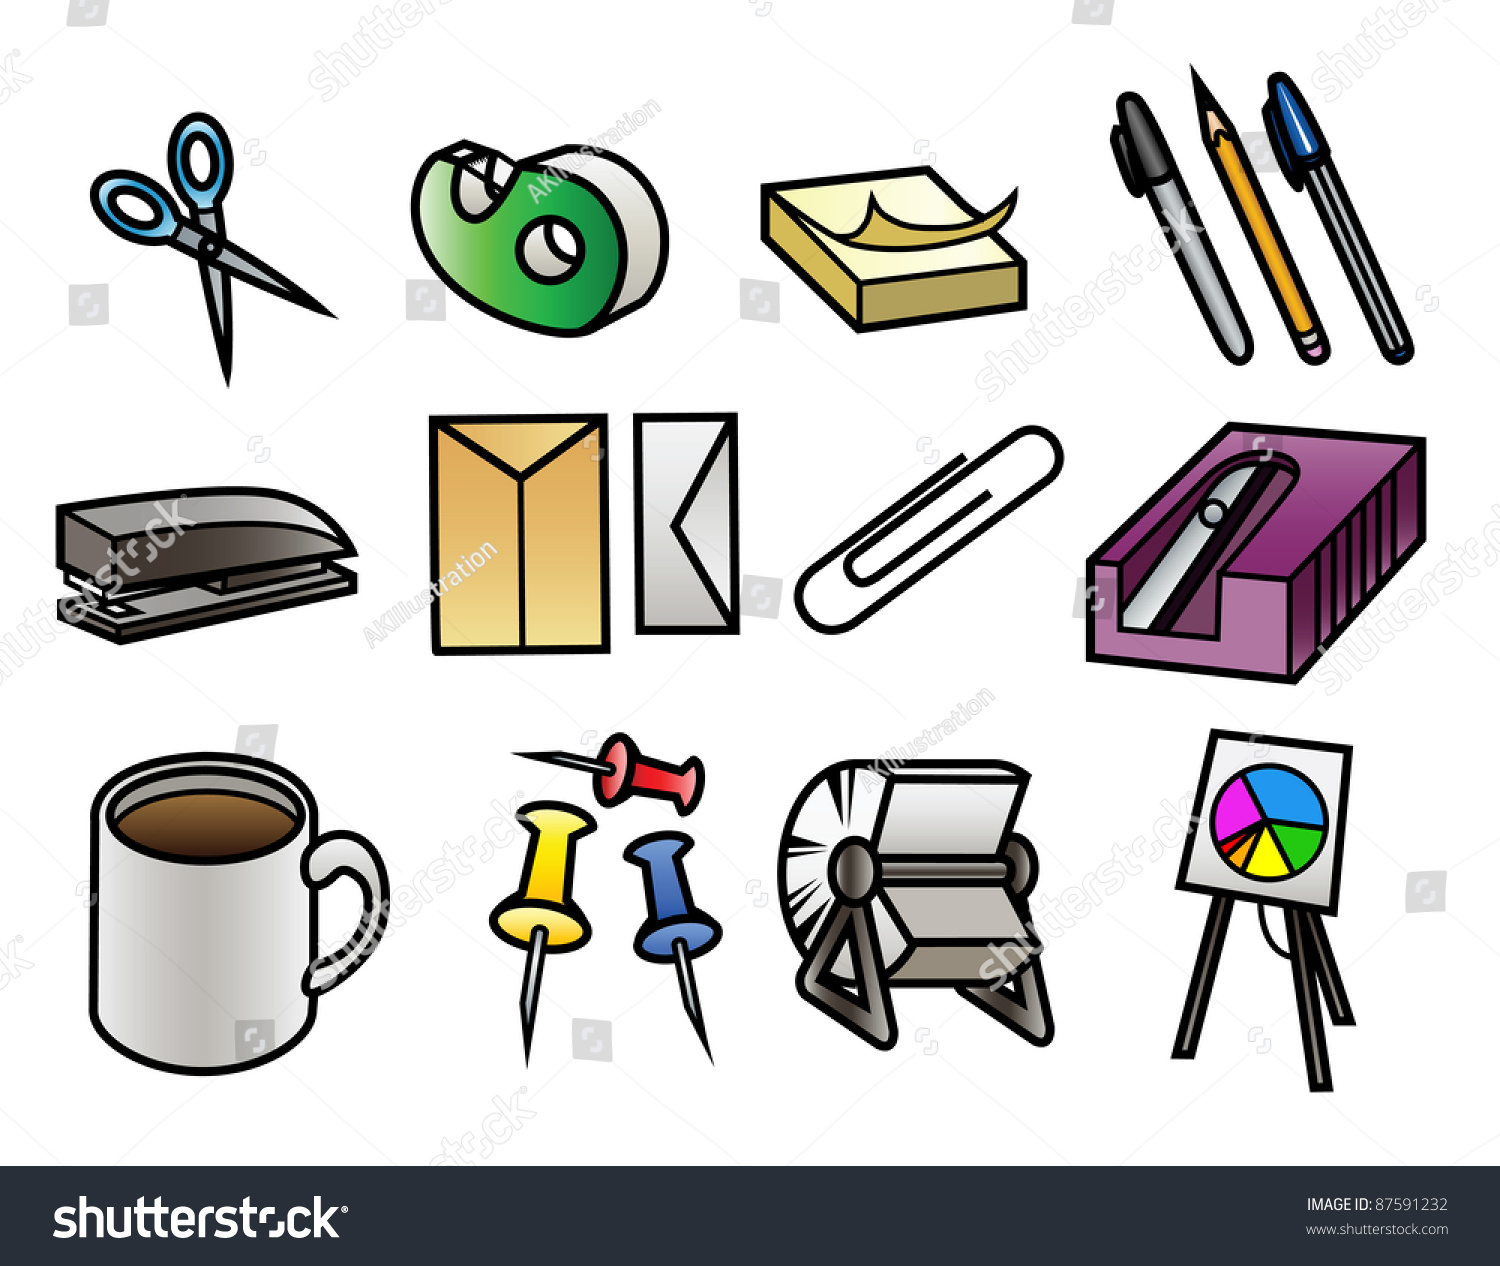 free clipart images office supplies - photo #25